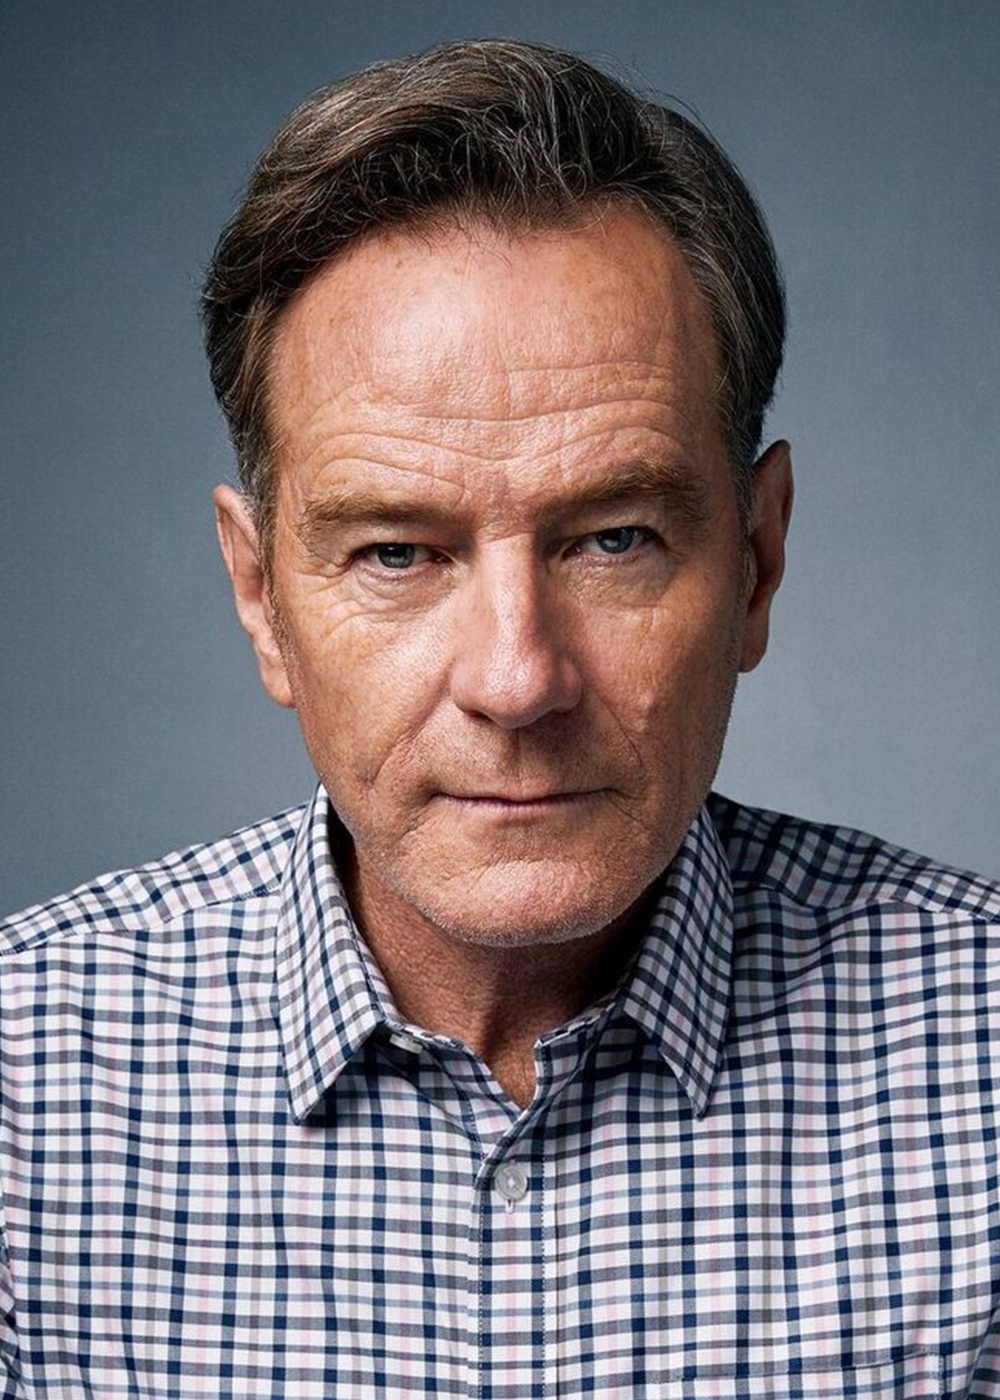 Happy 65th birthday to Bryan Cranston!! 

What\s your favorite show or film starring Bryan? 